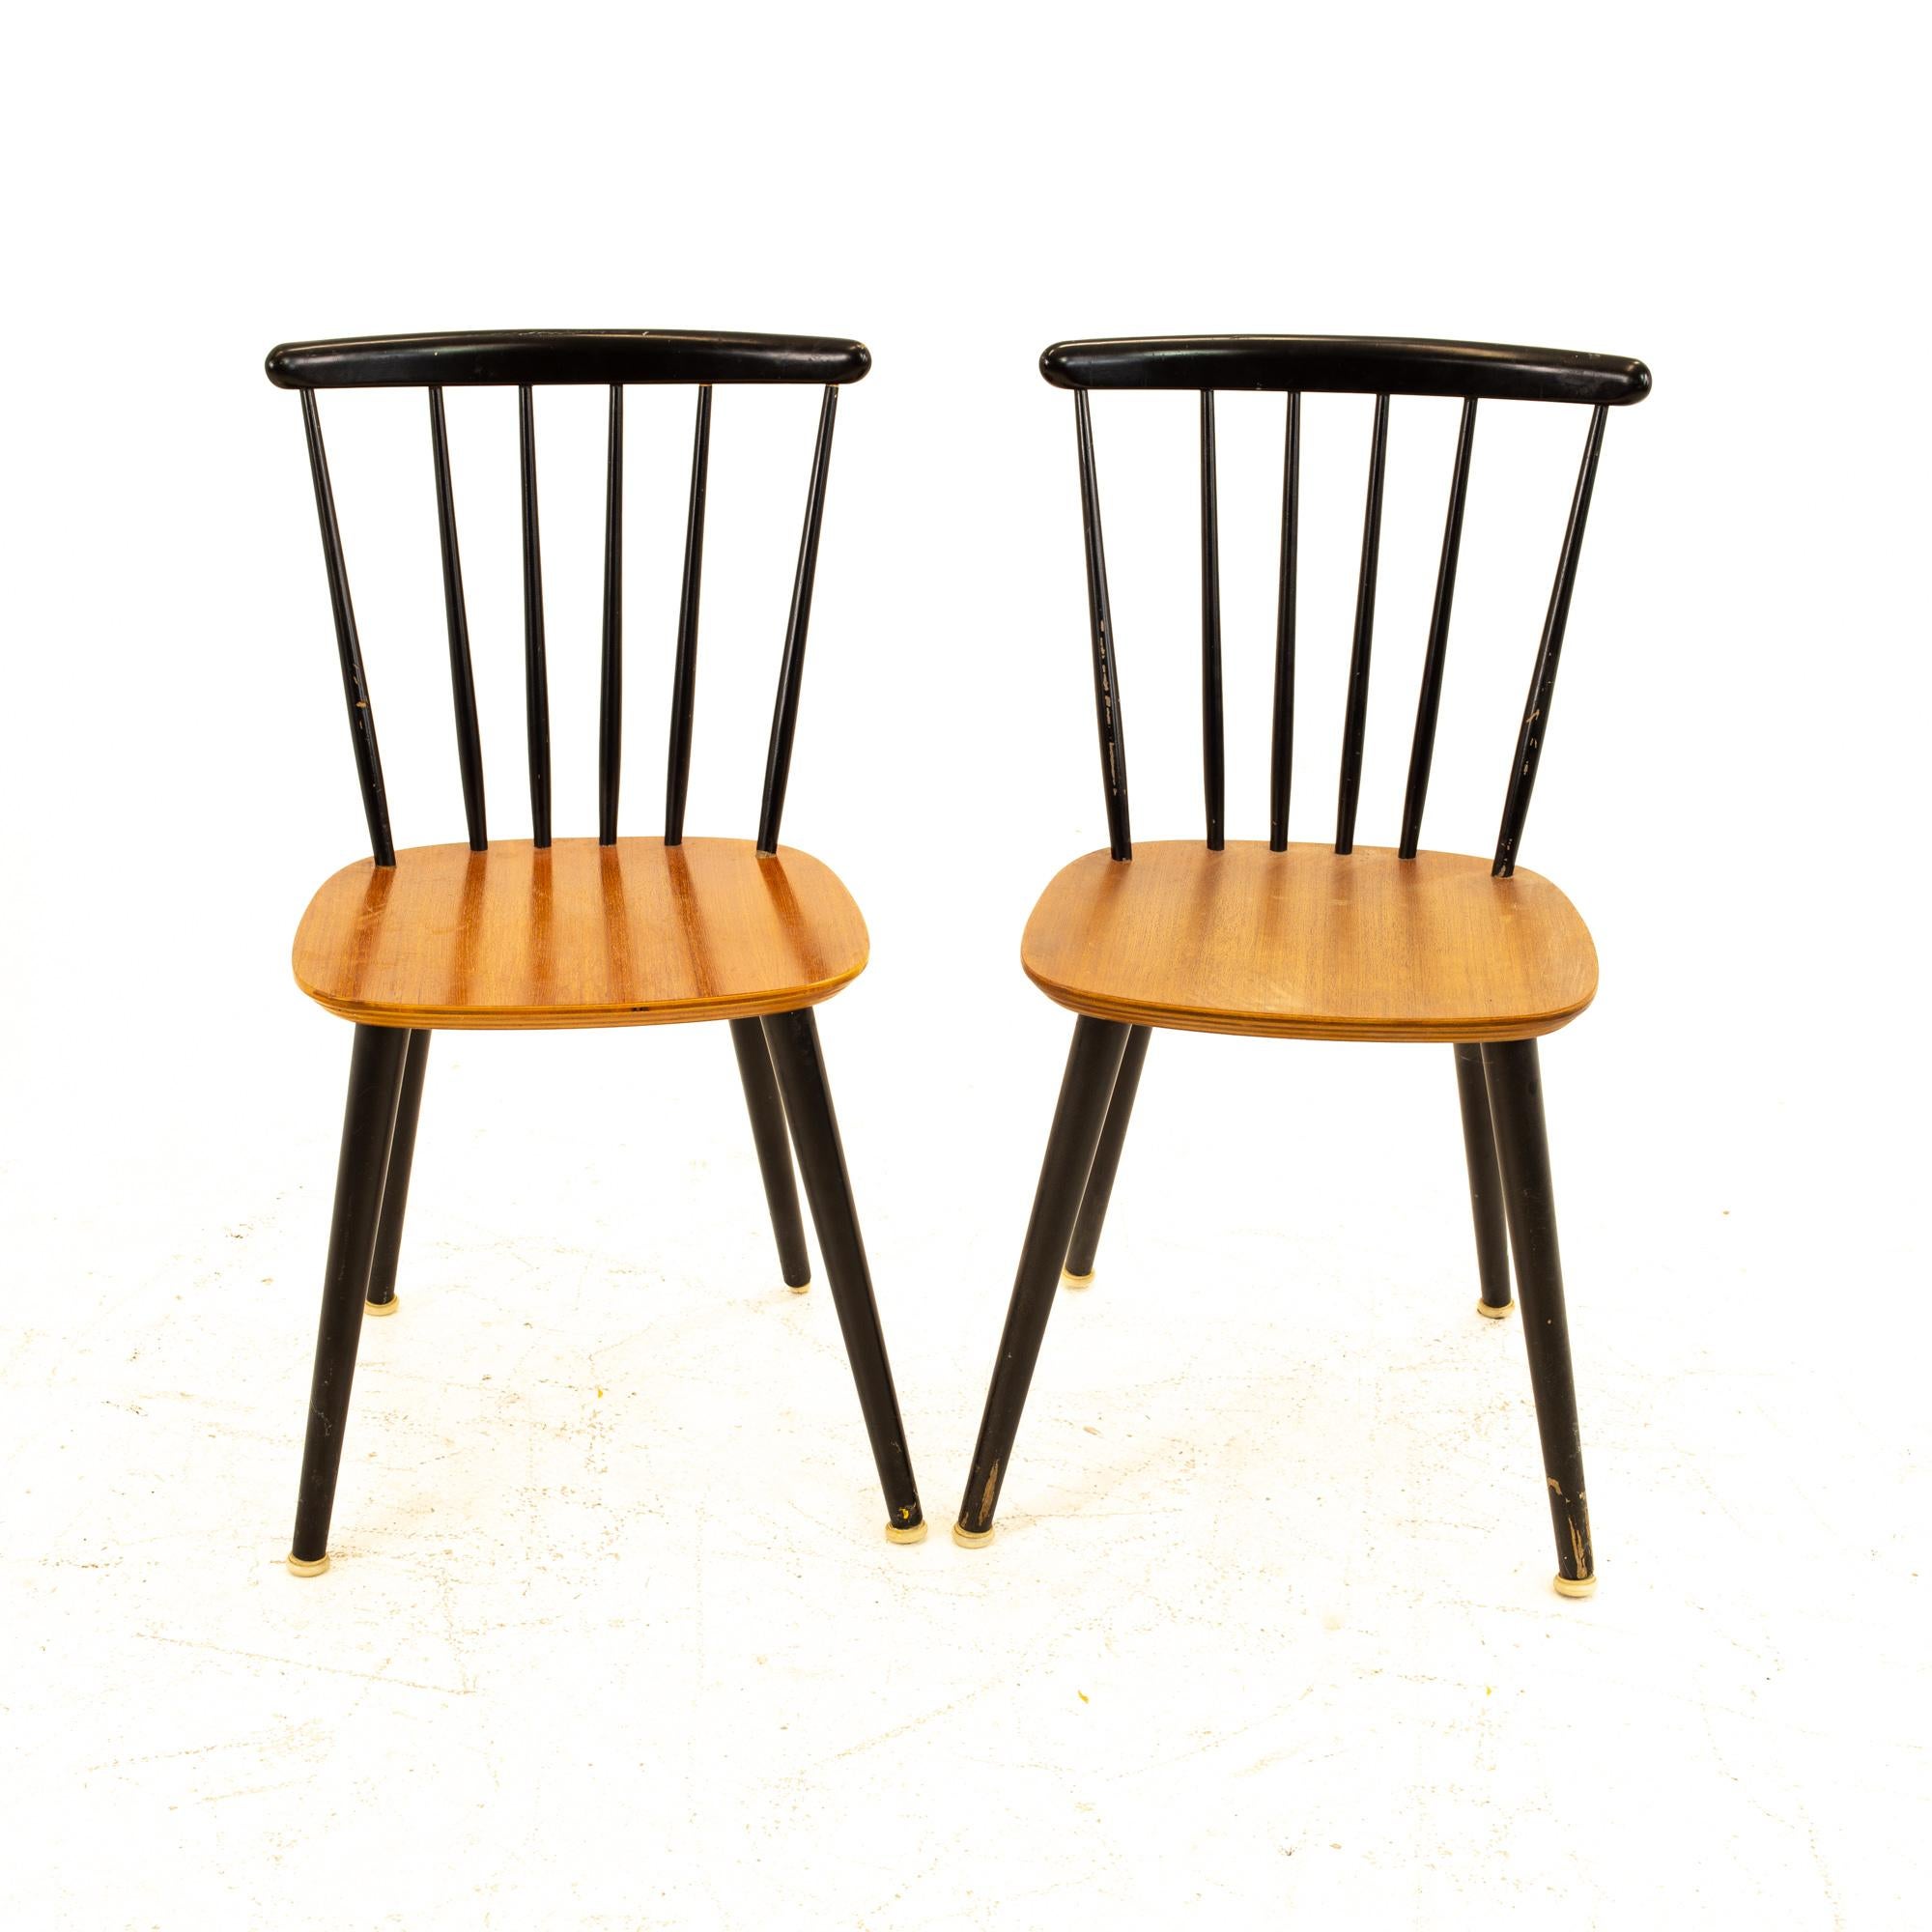 Thomas Harlev for Farstrup Mobelfabrik Danish Mid Century Dining Chairs - Pair
Each chair measures: 15.75 wide x 17.75 deep x 32.5 high, with a seat height of 17.25 inches

All pieces of furniture can be had in what we call Restored Vintage